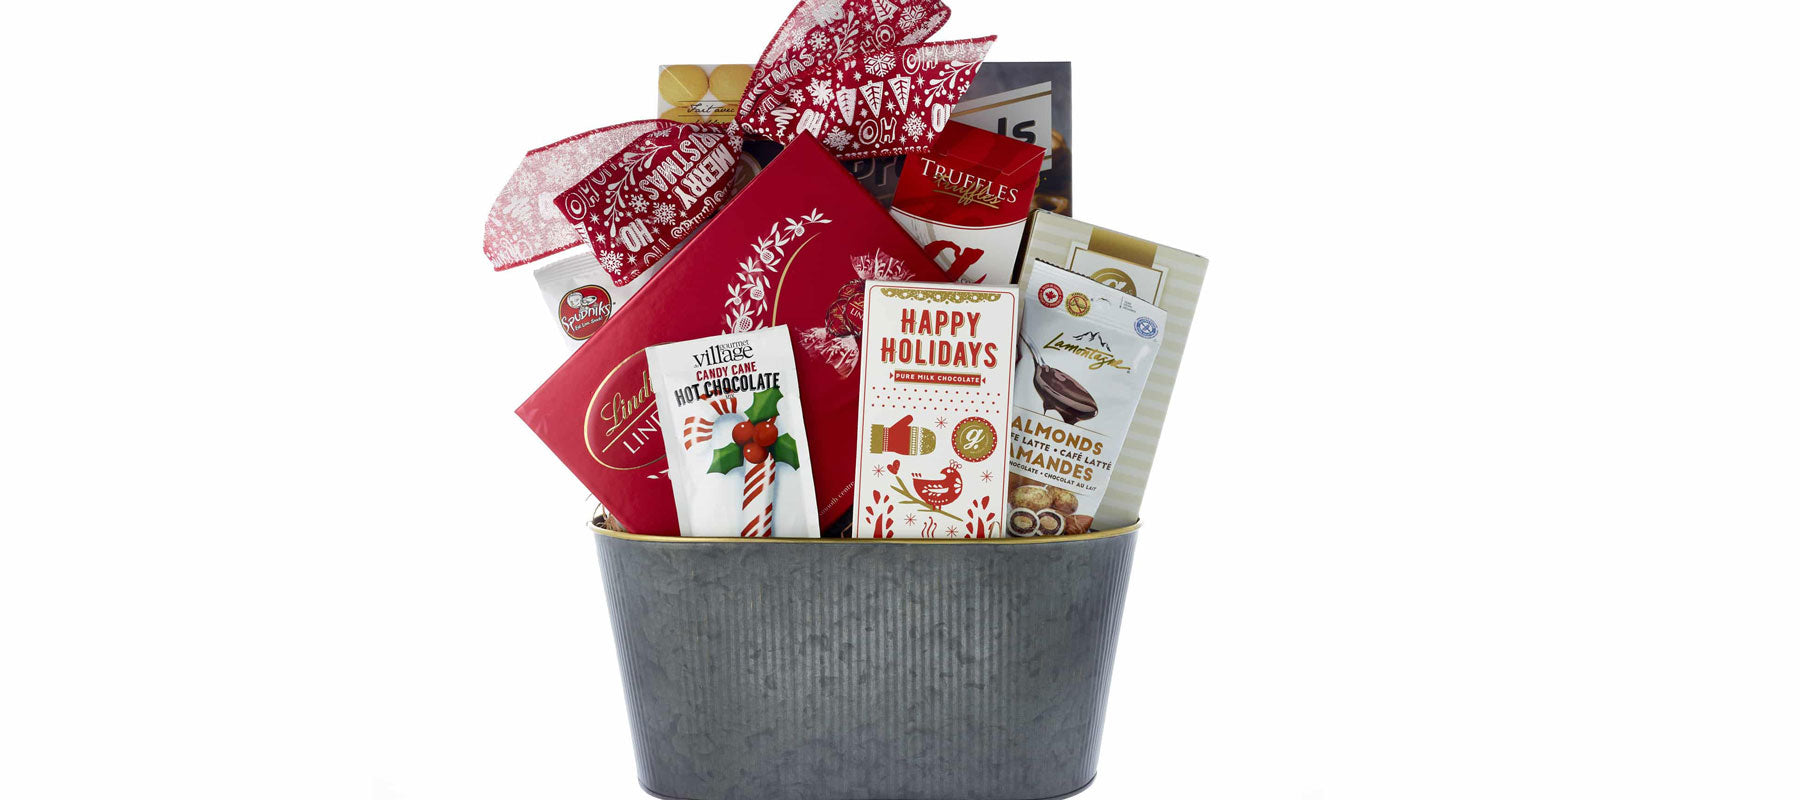 10 Branded Holiday Gift Ideas For Employees | Giftsenda